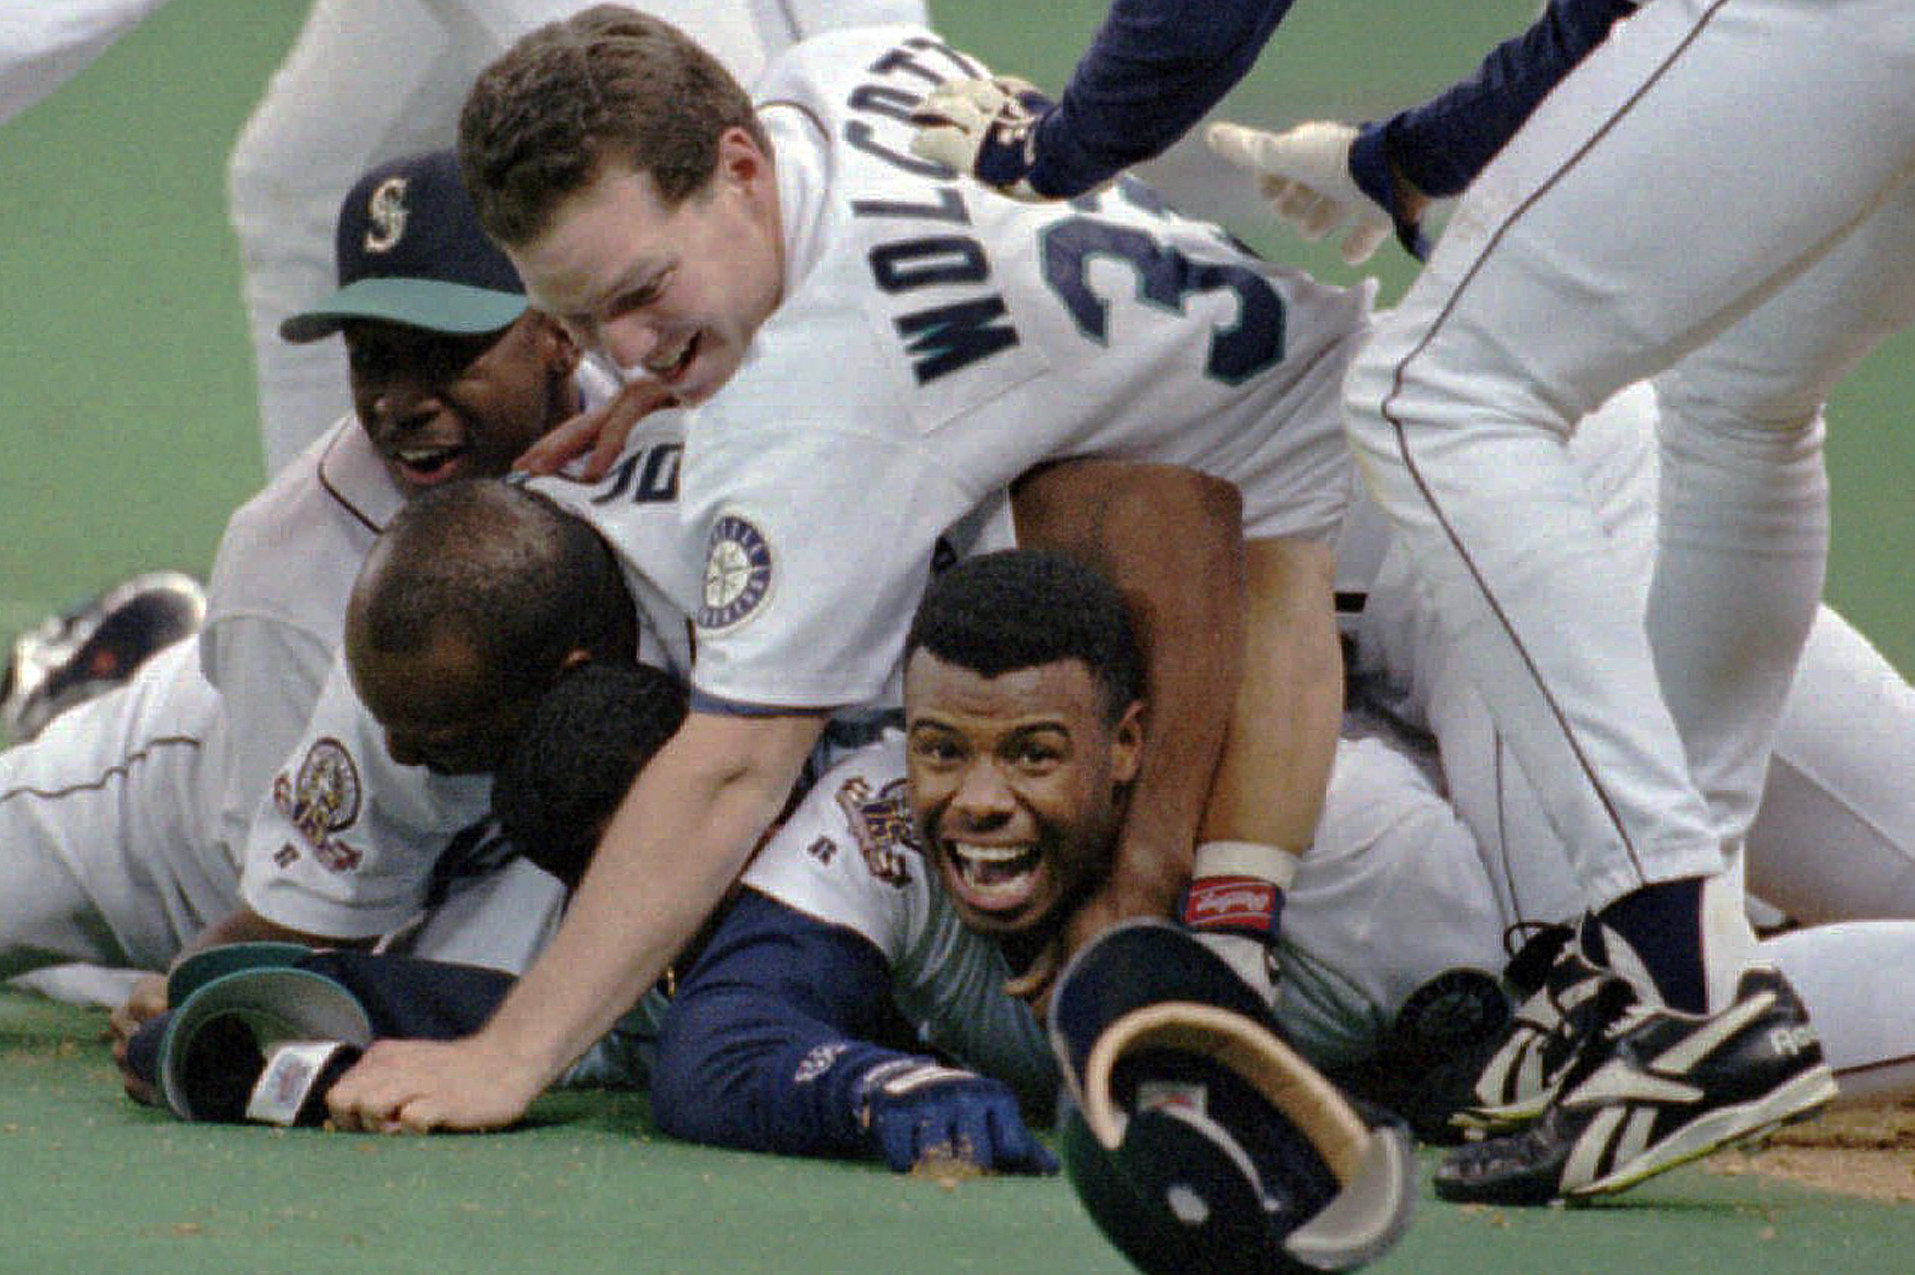 Photo taken right before Edgar Martinez double to win the 1995